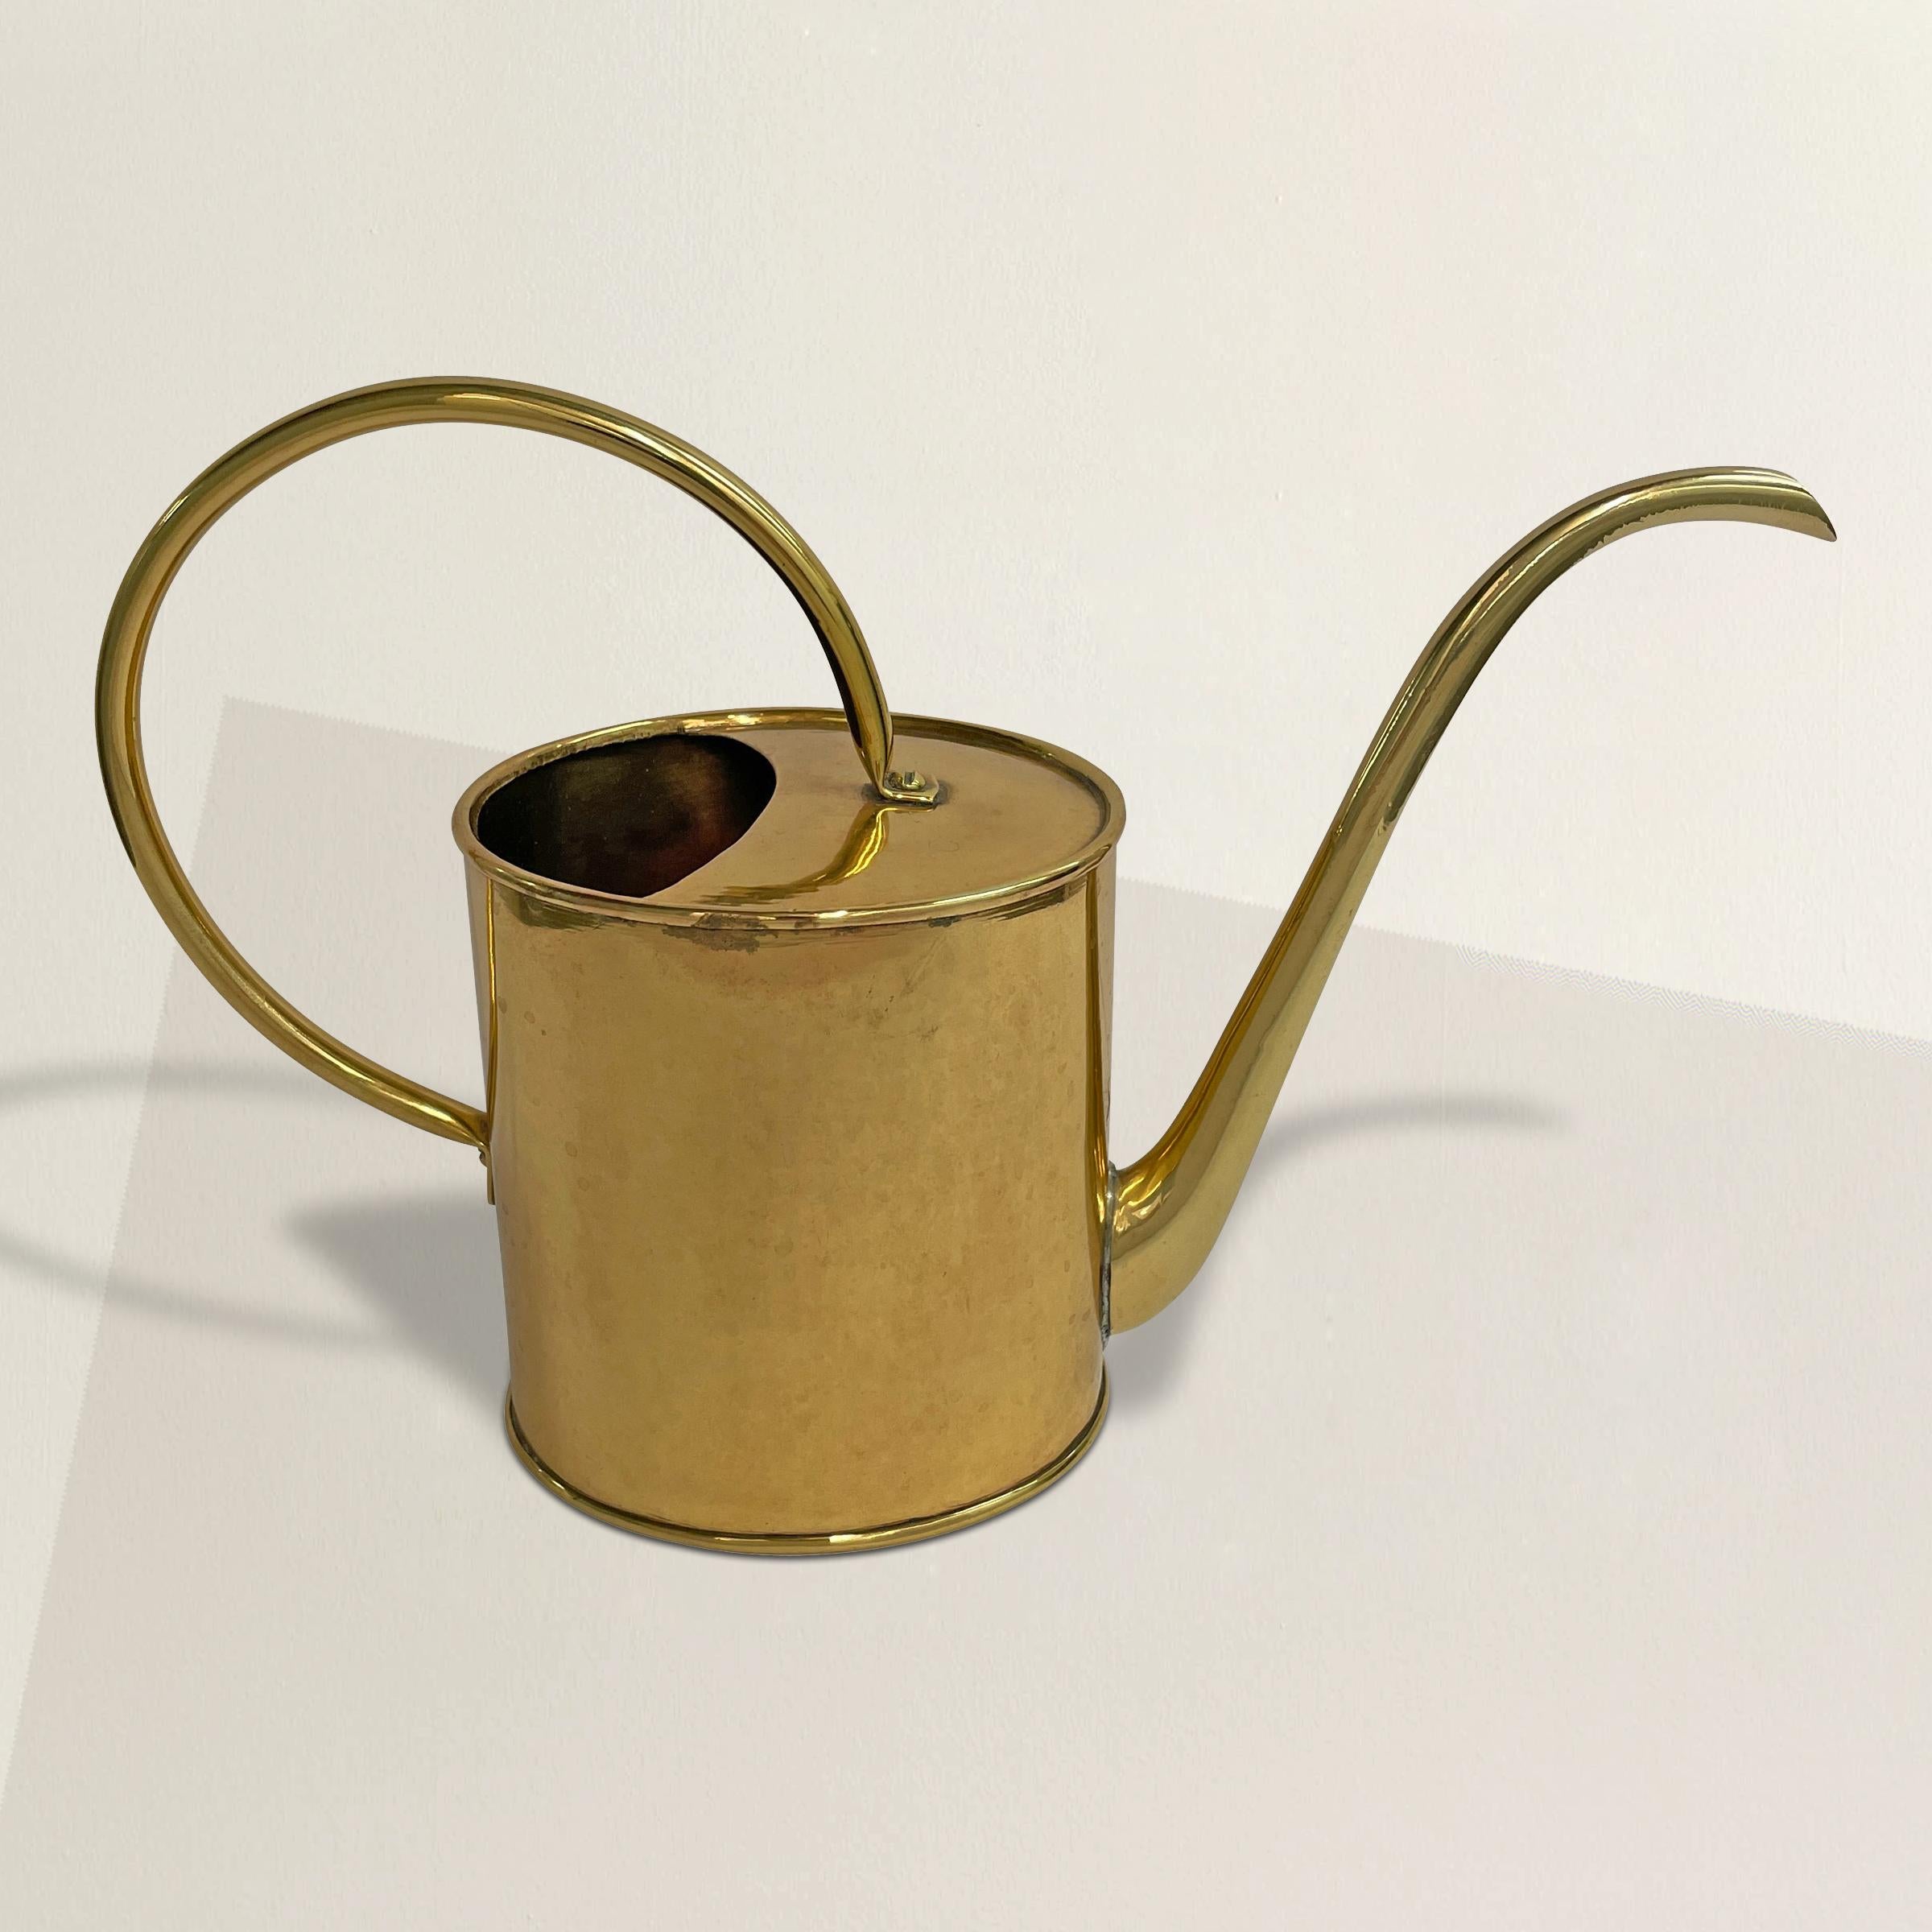 A faithful and hardworking vintage English brass watering can with a large round handle and a mirrored polished finish. Perfect for watering house plants, or smaller planters on your patio.